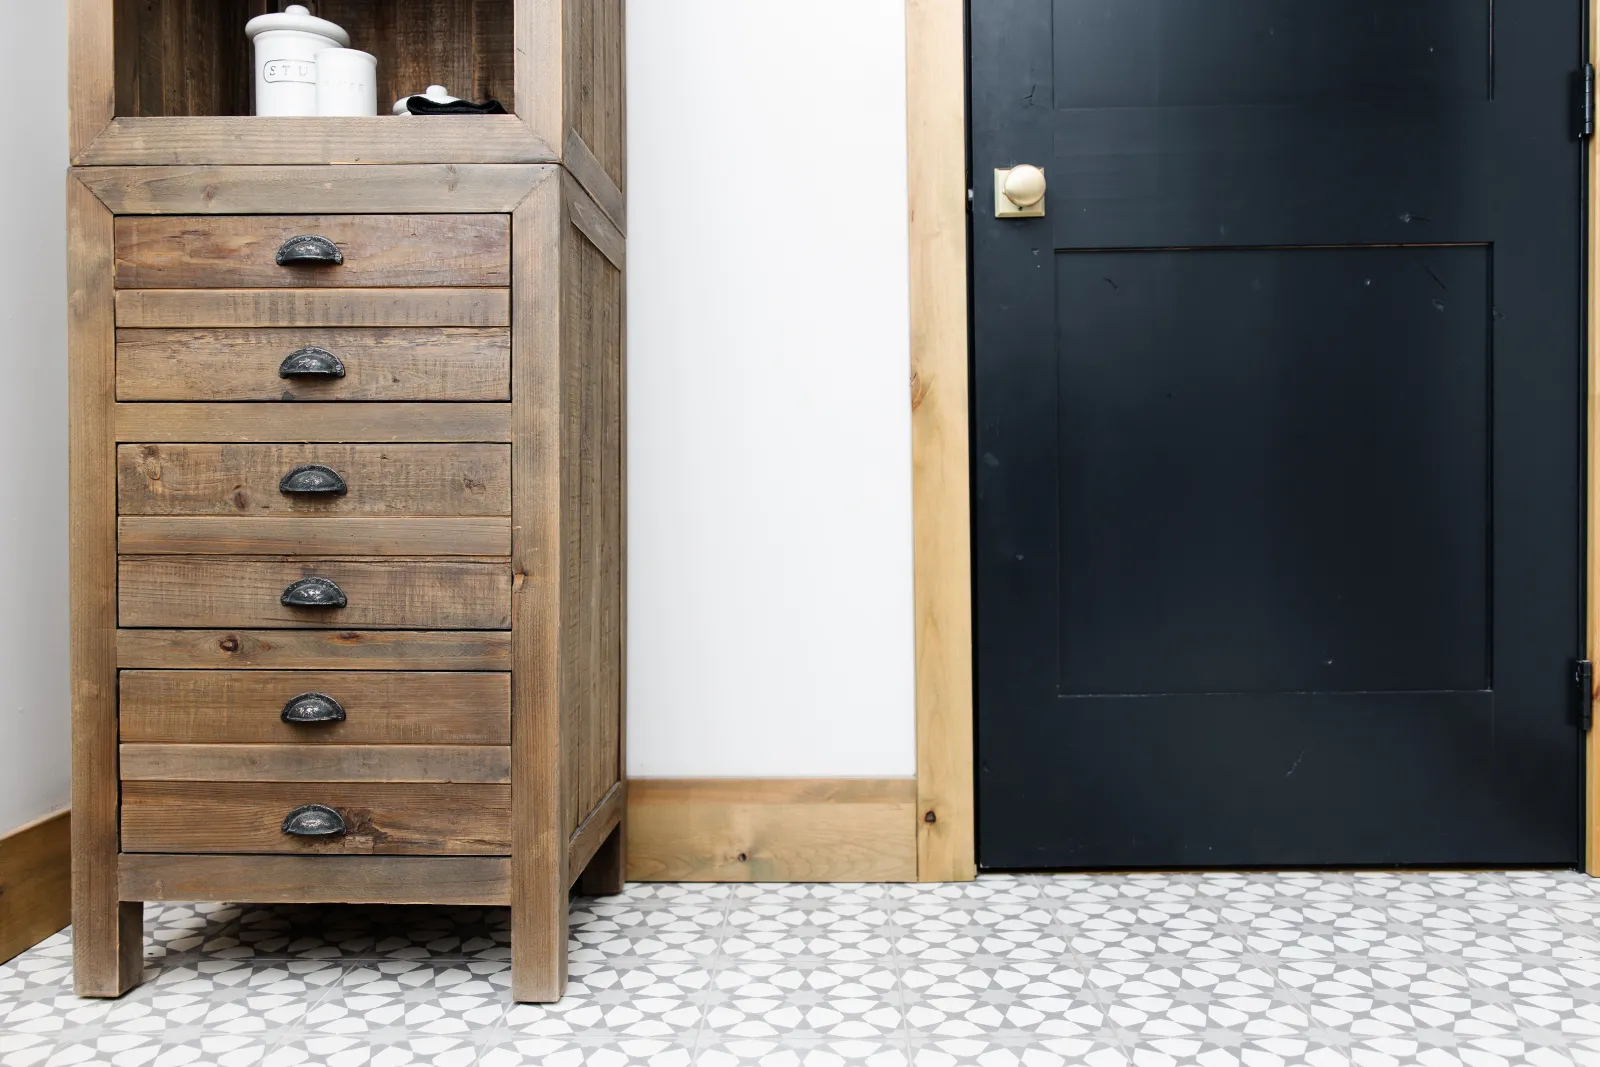 narrow tall wood dresser on a white patterned cold tile floor and a black door